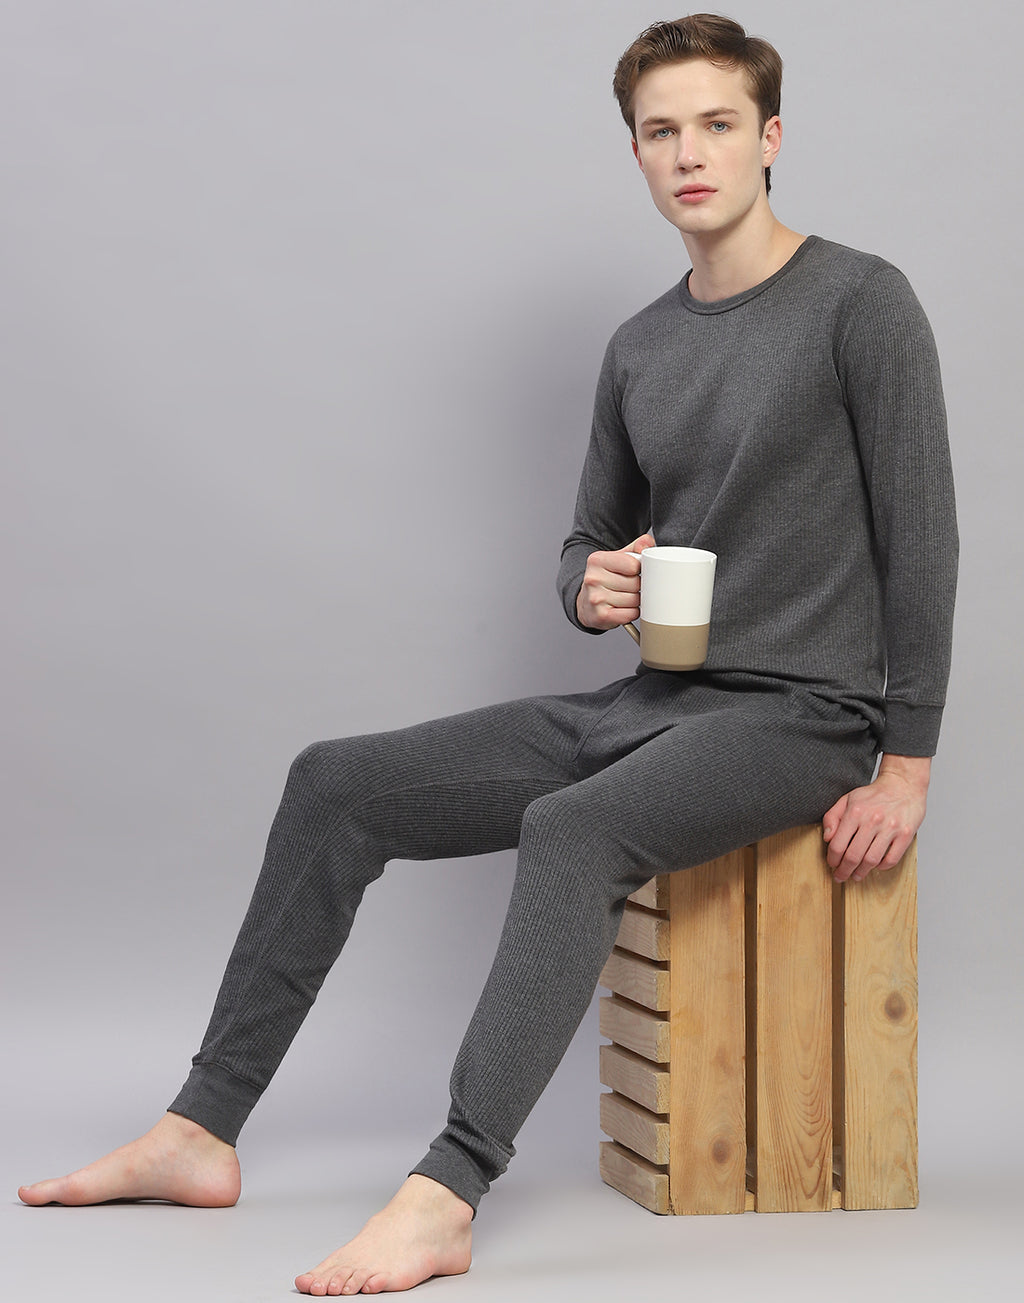 Women Blended Cotton Grey Ladies Thermal Wear at Rs 750/set in Ludhiana